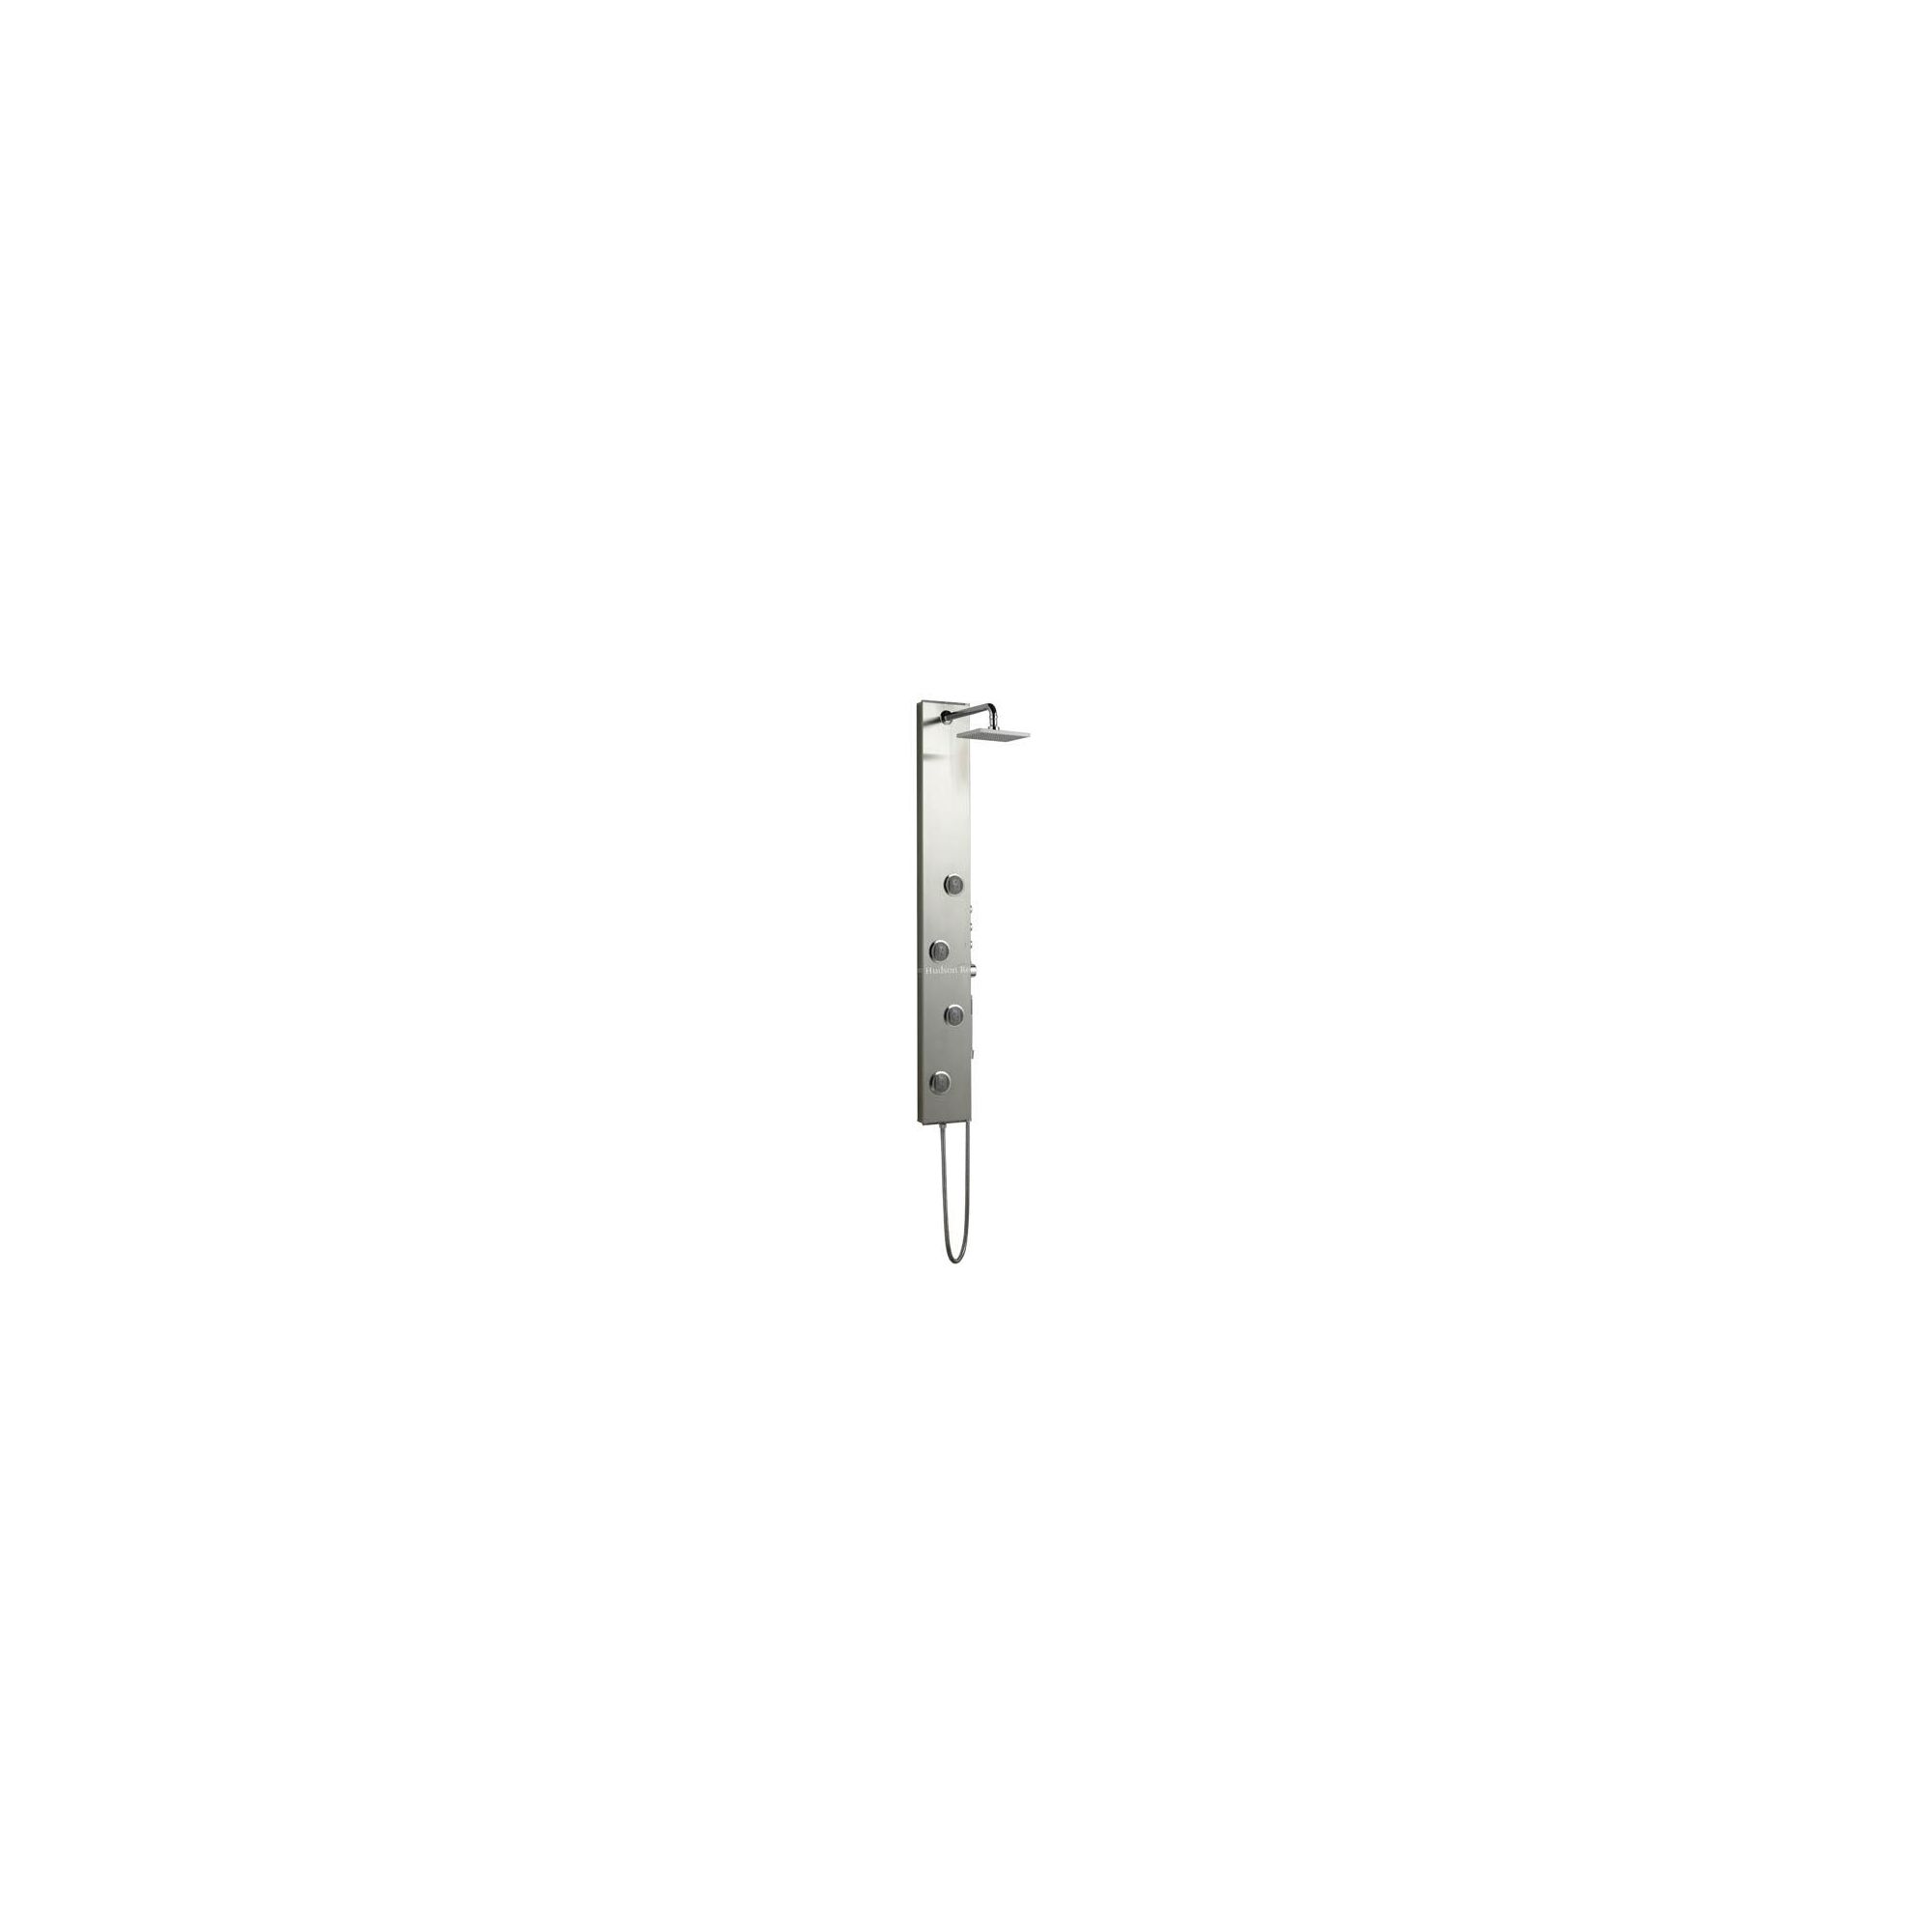 Hudson Reed Theme Dream Shower Stainless Steel at Tesco Direct